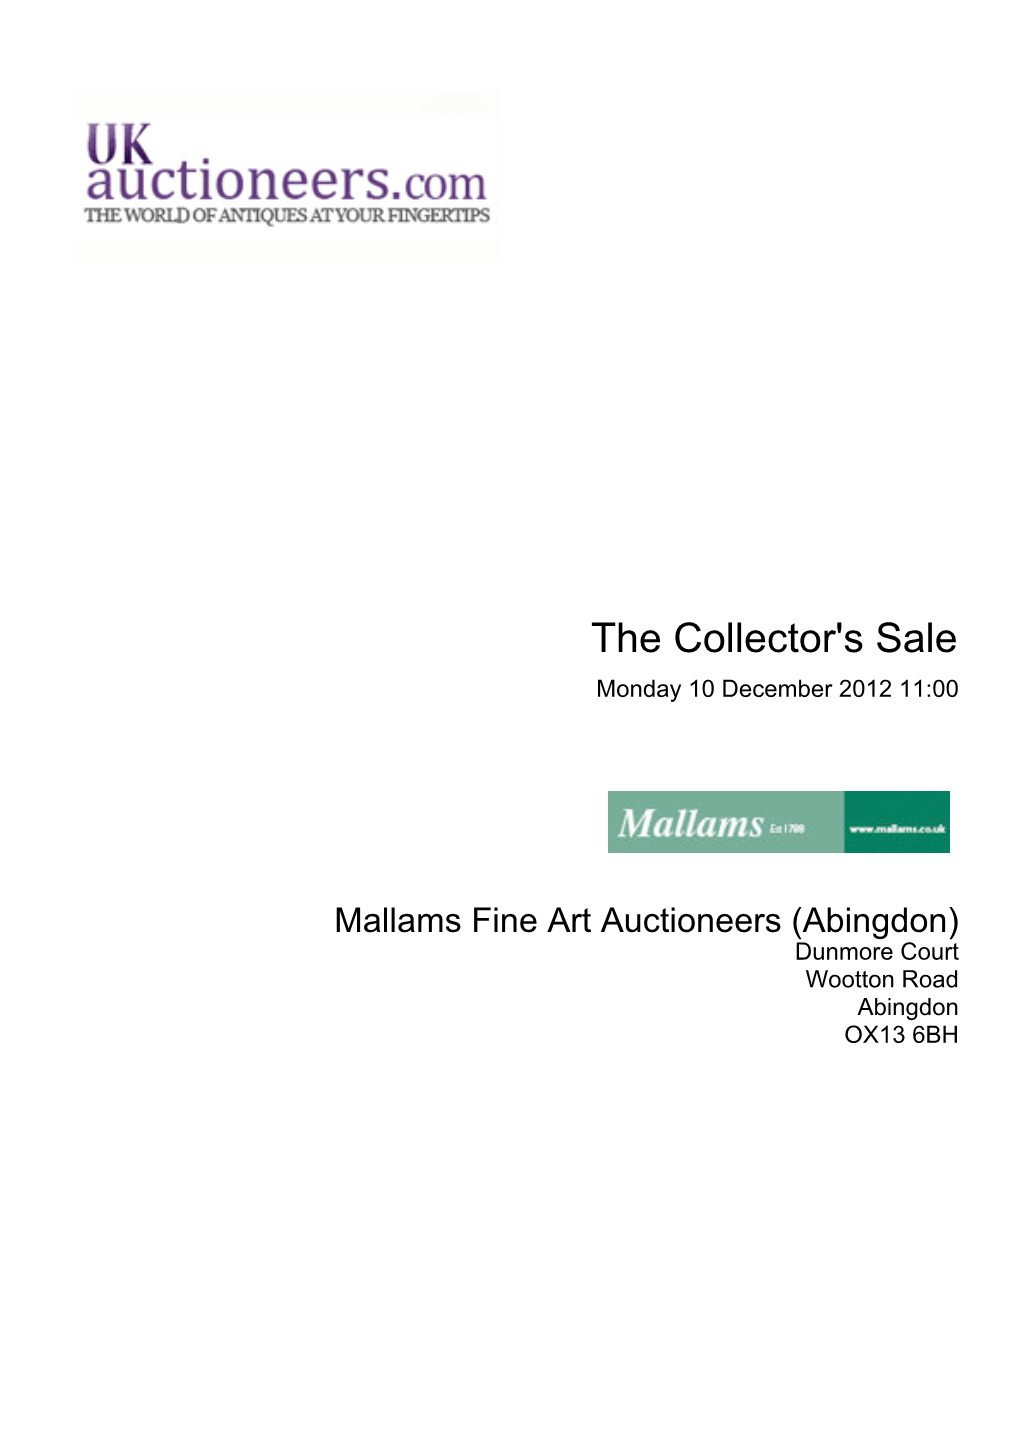 The Collector's Sale Monday 10 December 2012 11:00